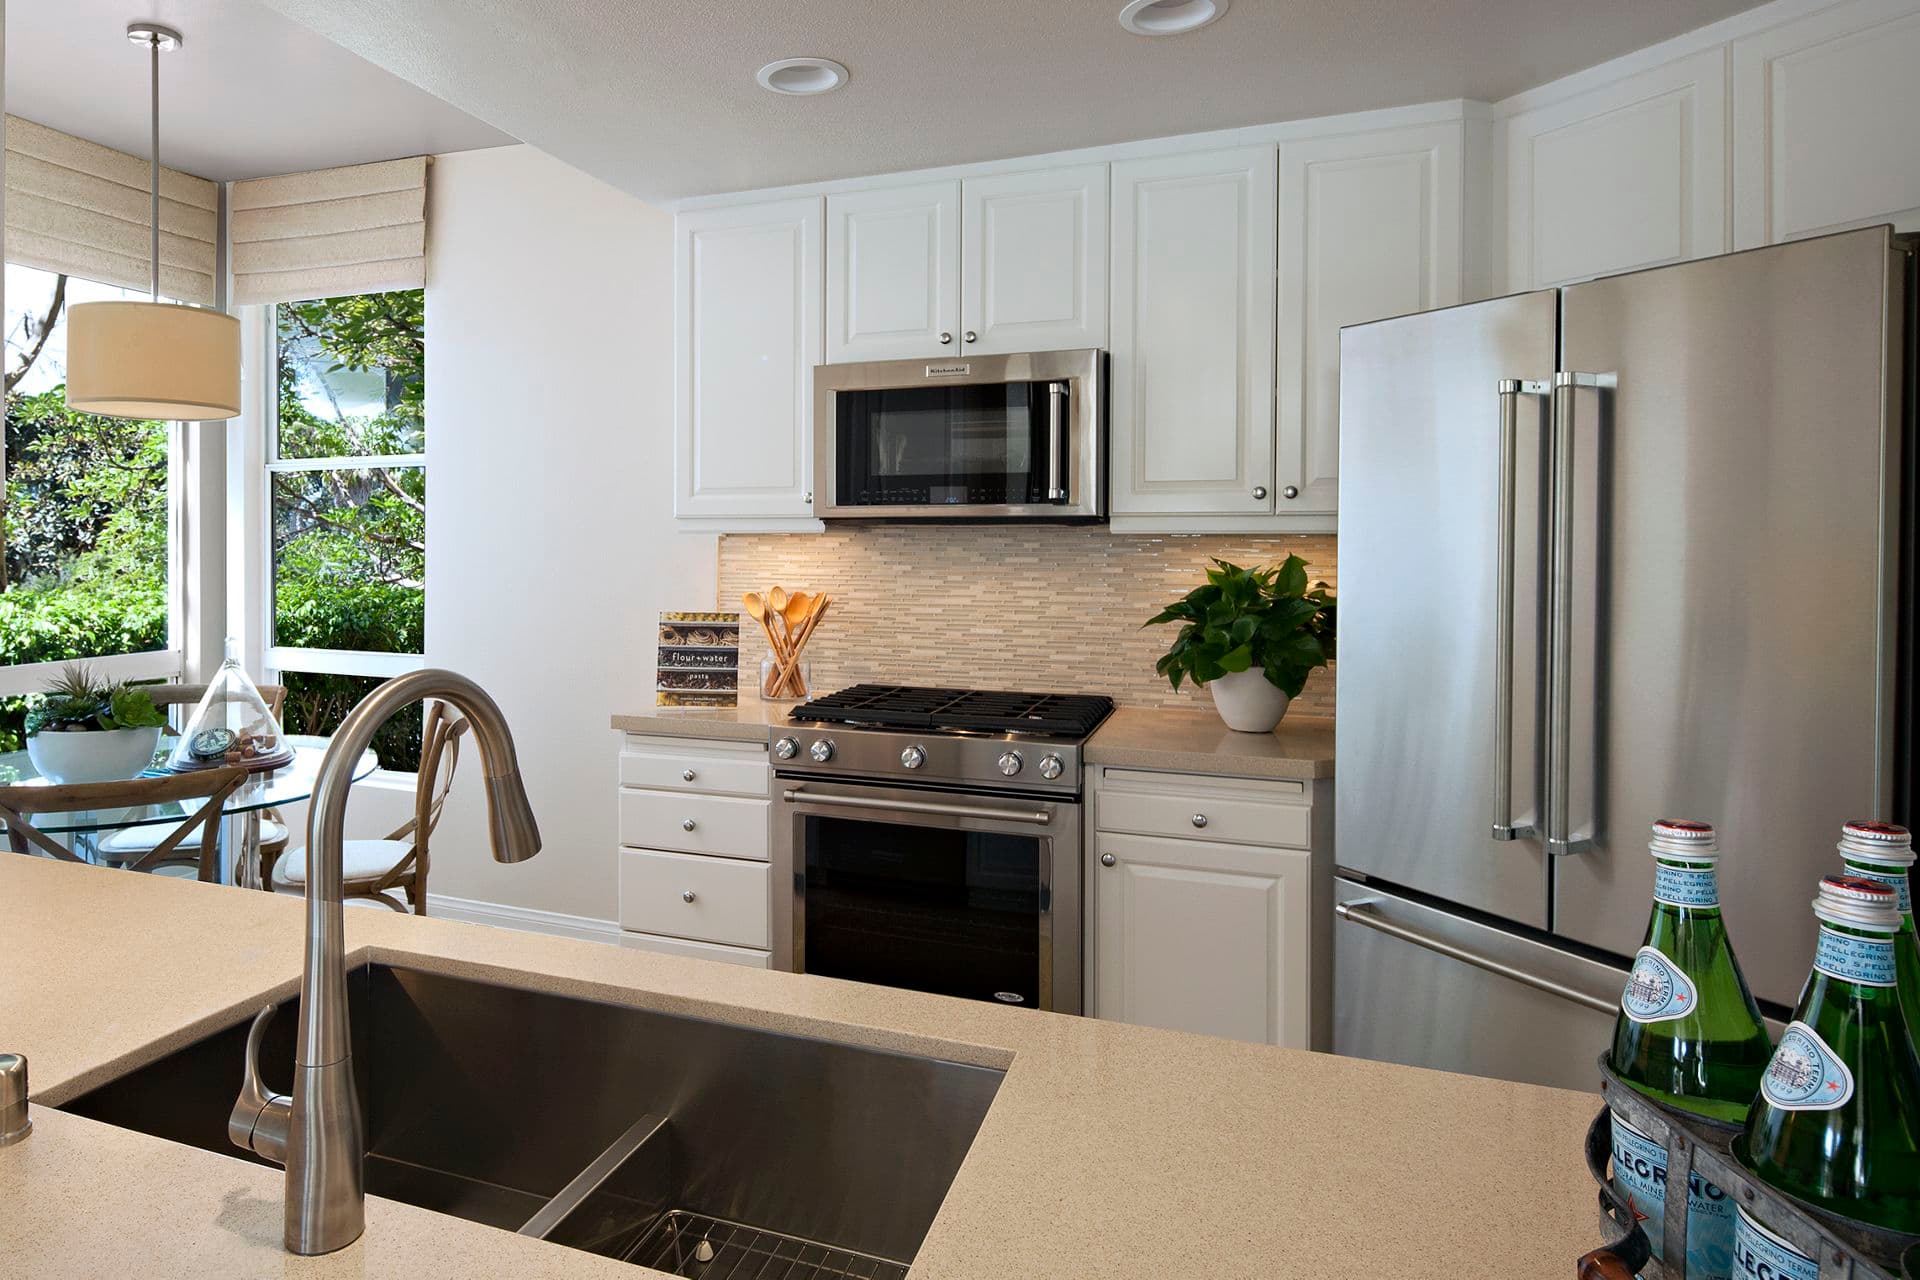 Interior view of kitchen at The Colony at Fashion Island Apartment Homes in Newport Beach, CA.